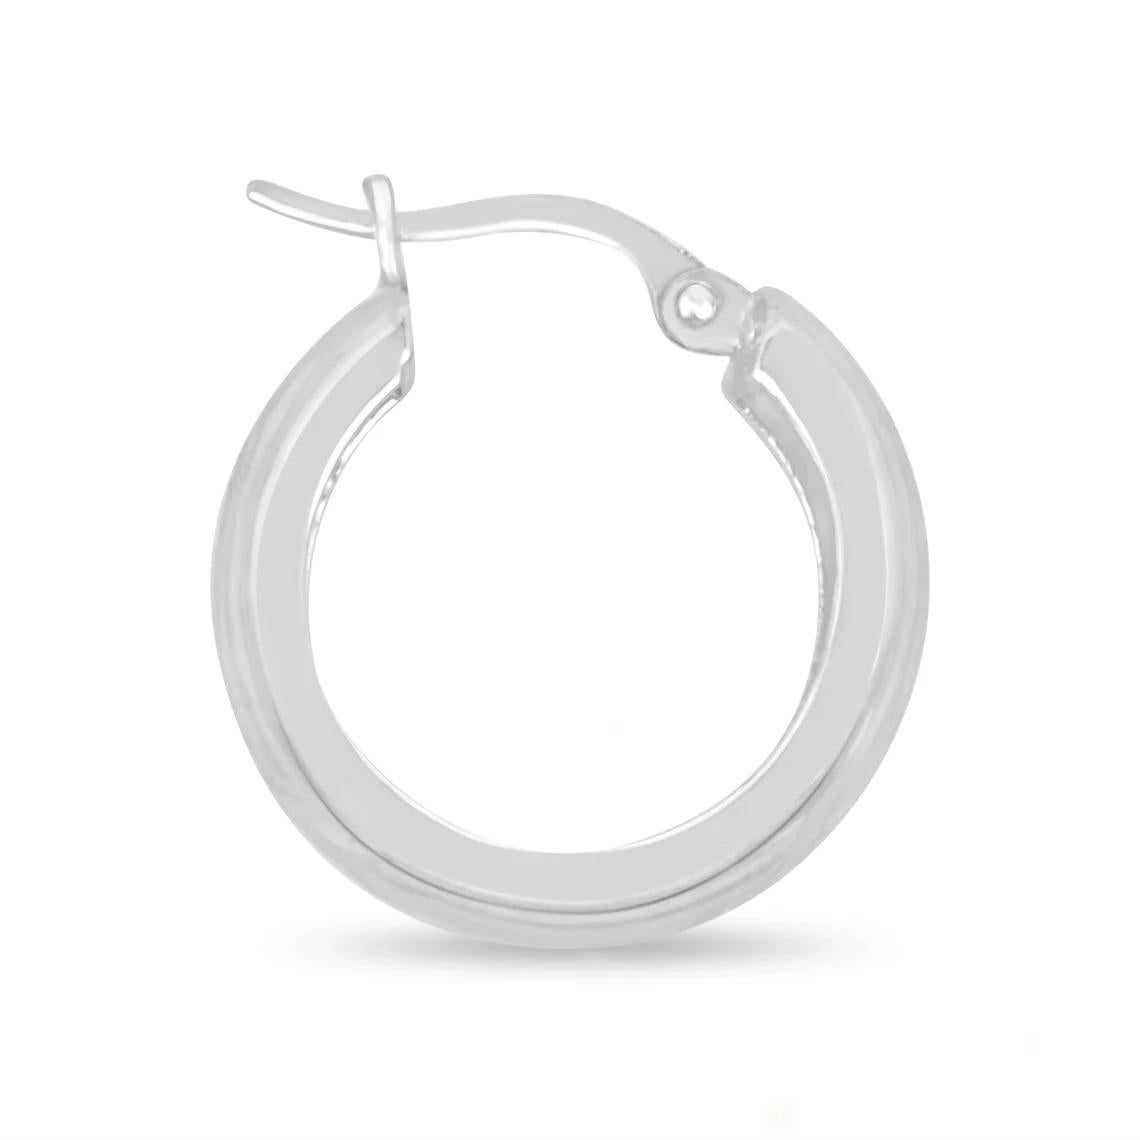 Elevate your style with our stunning 18k White Gold Hoop Earrings. These lightweight and comfortable hoops, measuring 10mm in width, are expertly crafted from 18k white gold, radiating a timeless elegance. The V-cut and vertical line styling on the